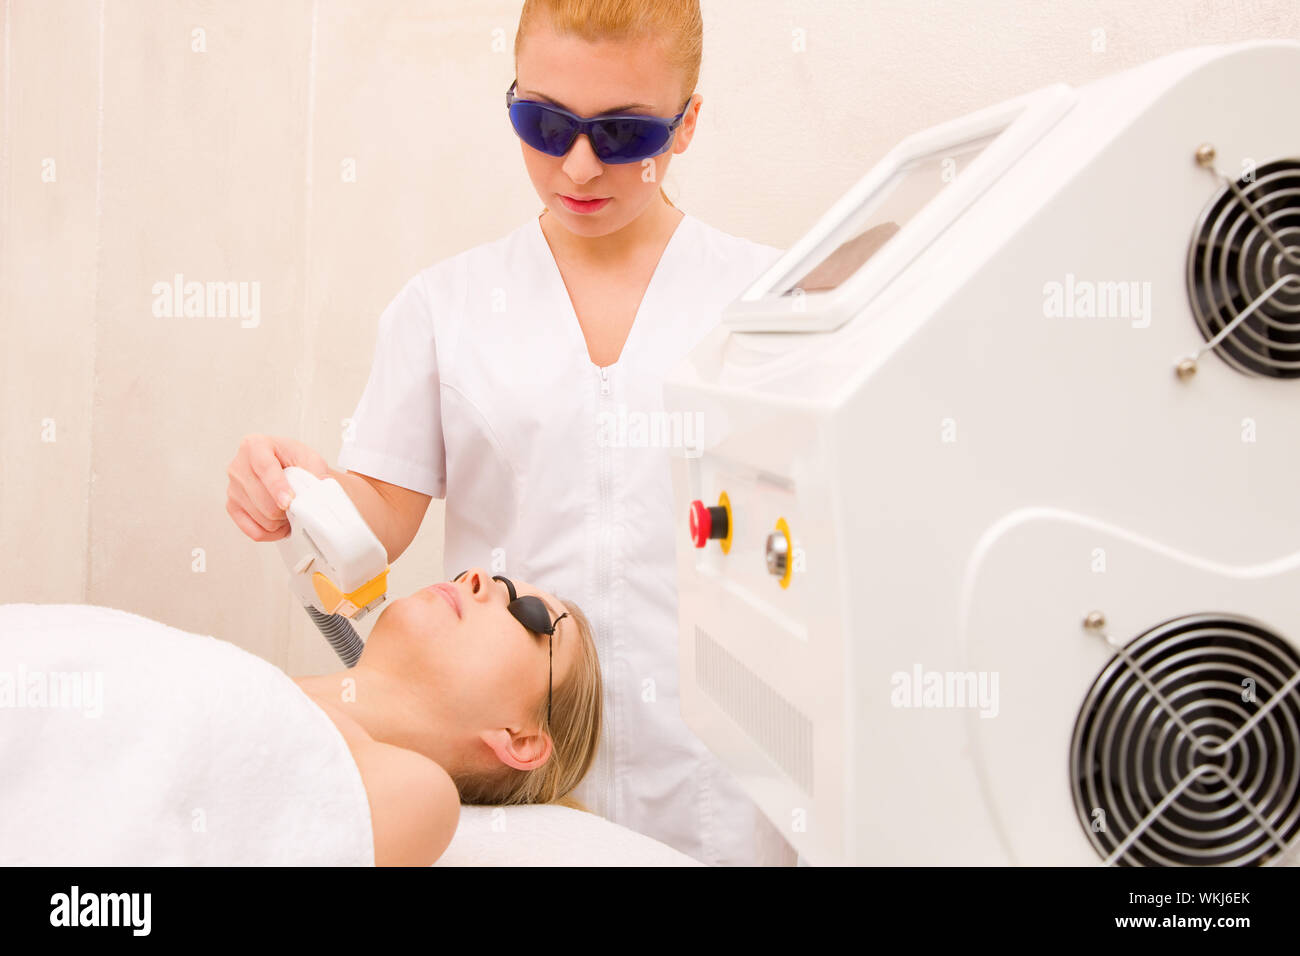 Woman getting ultrasound hair removal treatment Stock Photo